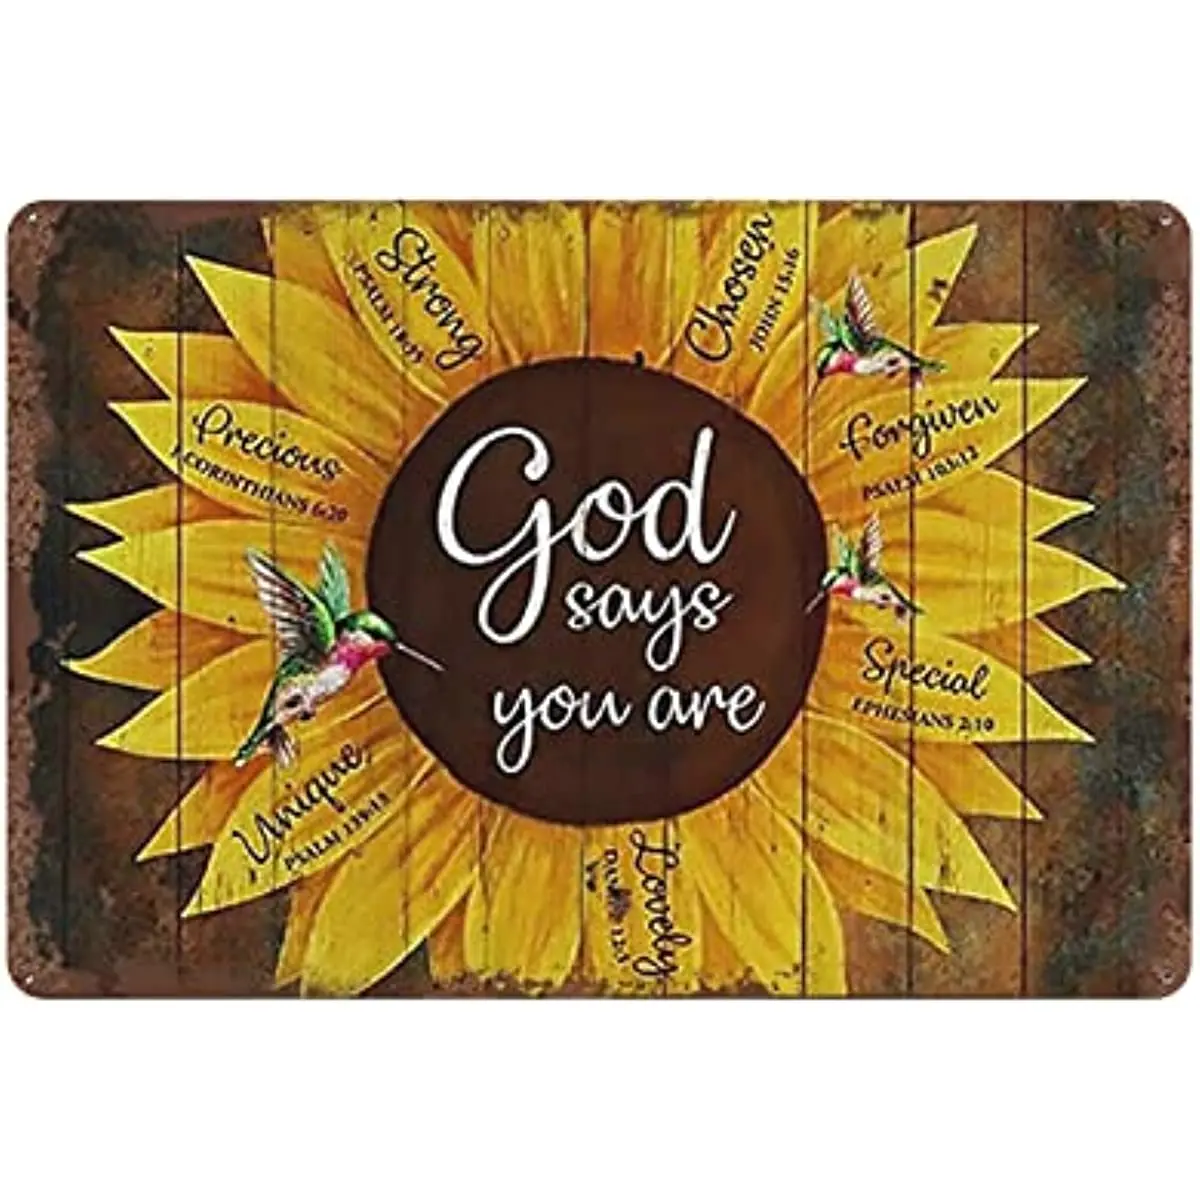 

Metal Tin Sign Vintage Hummingbird Sunflower God Says You Are Scripture Sunflower Bible Verses Christian for Home, Living Room